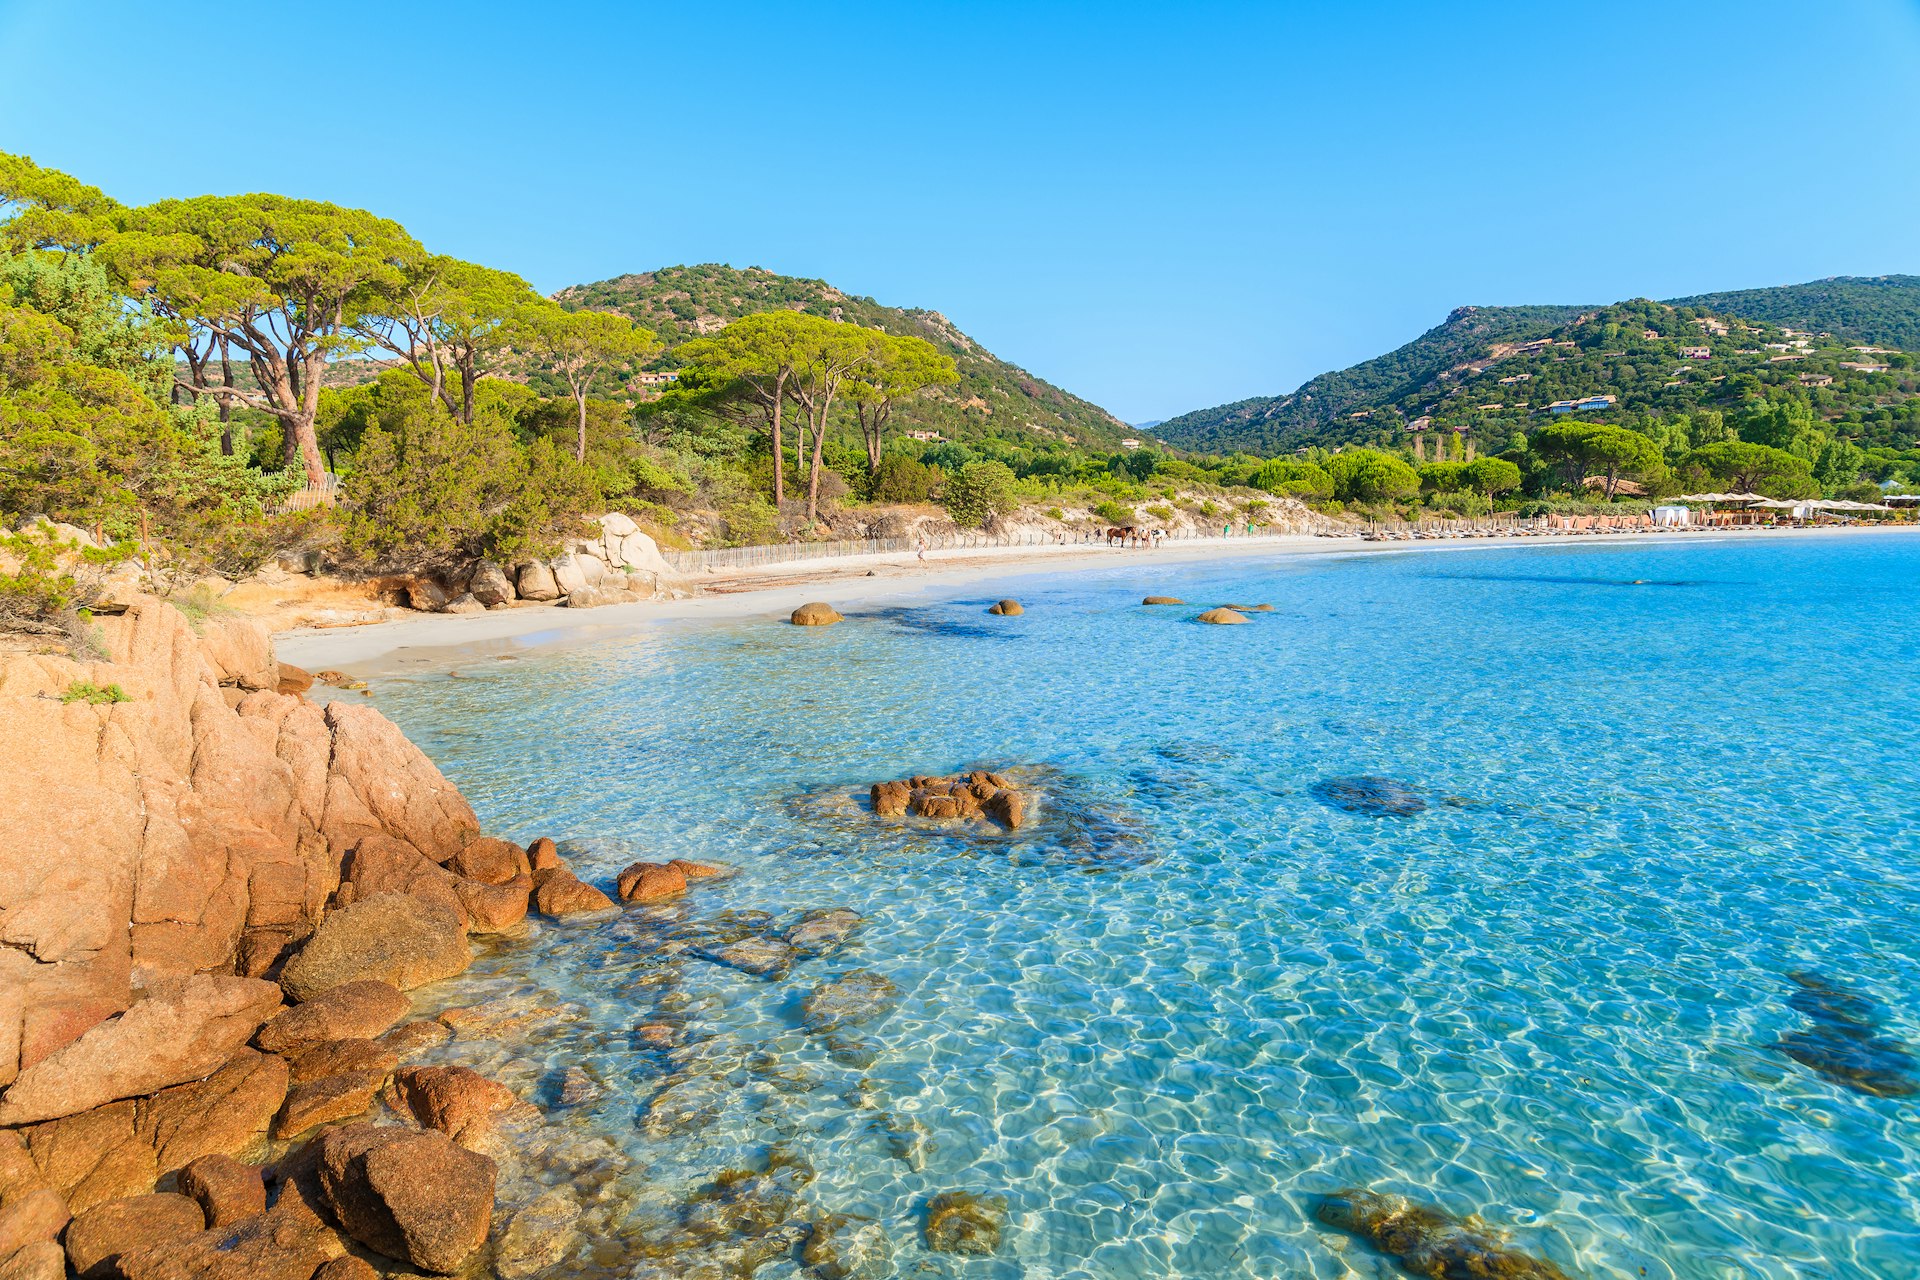 A view of Palombaggia beach on Corsica lapped by crystal clear water